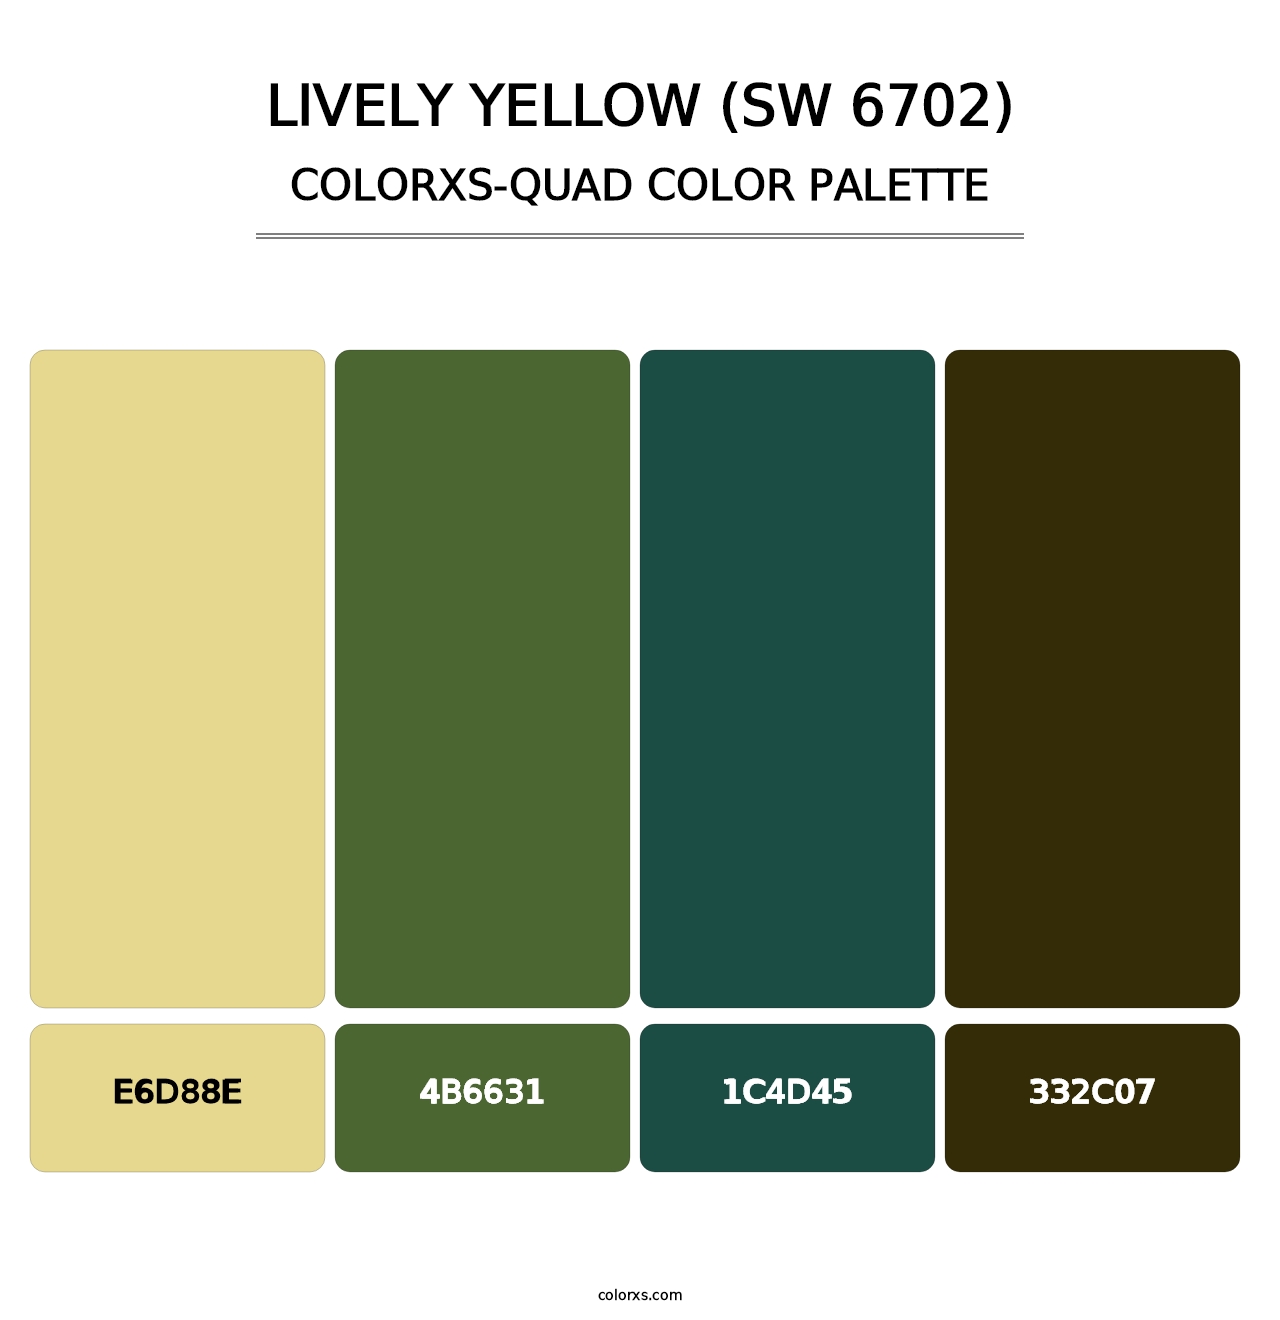 Lively Yellow (SW 6702) - Colorxs Quad Palette